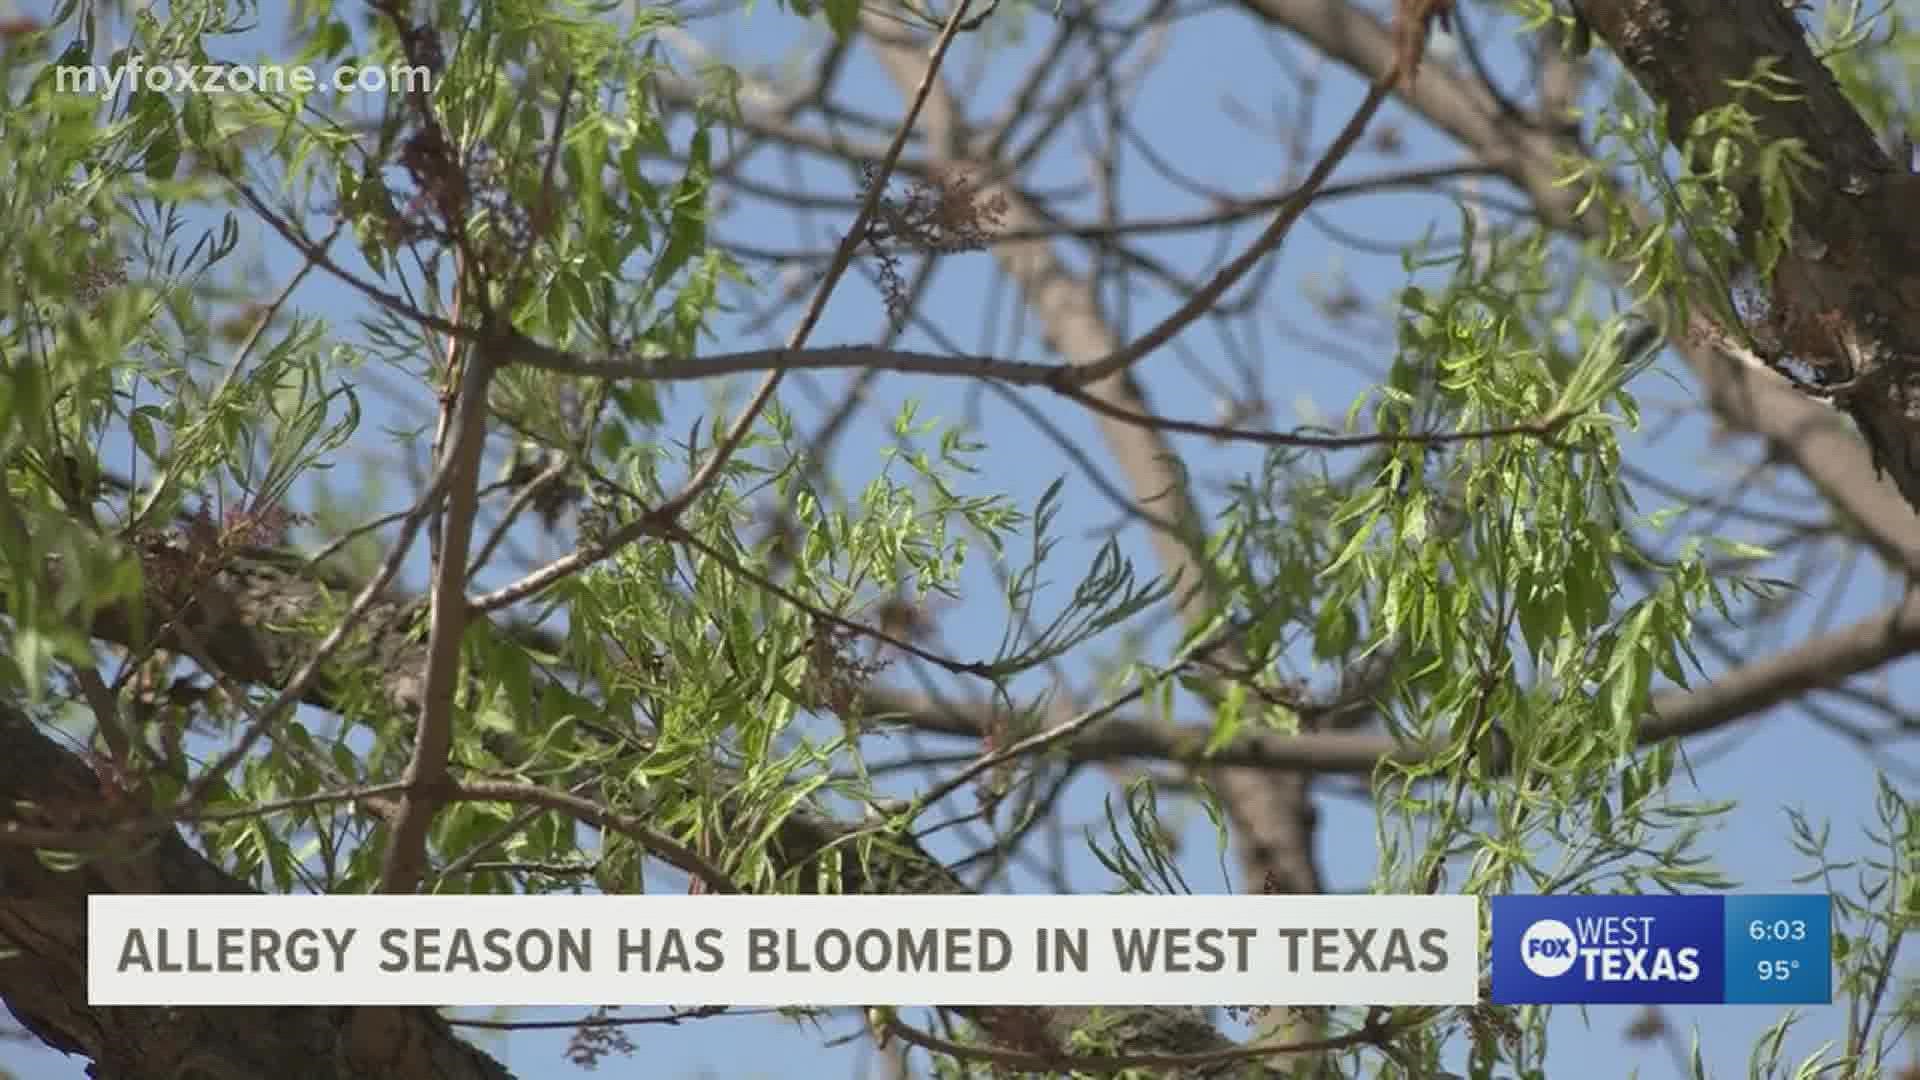 People are suffering from sneezing, congestion and other allergy symptoms because of the pollen in the West Texas air.